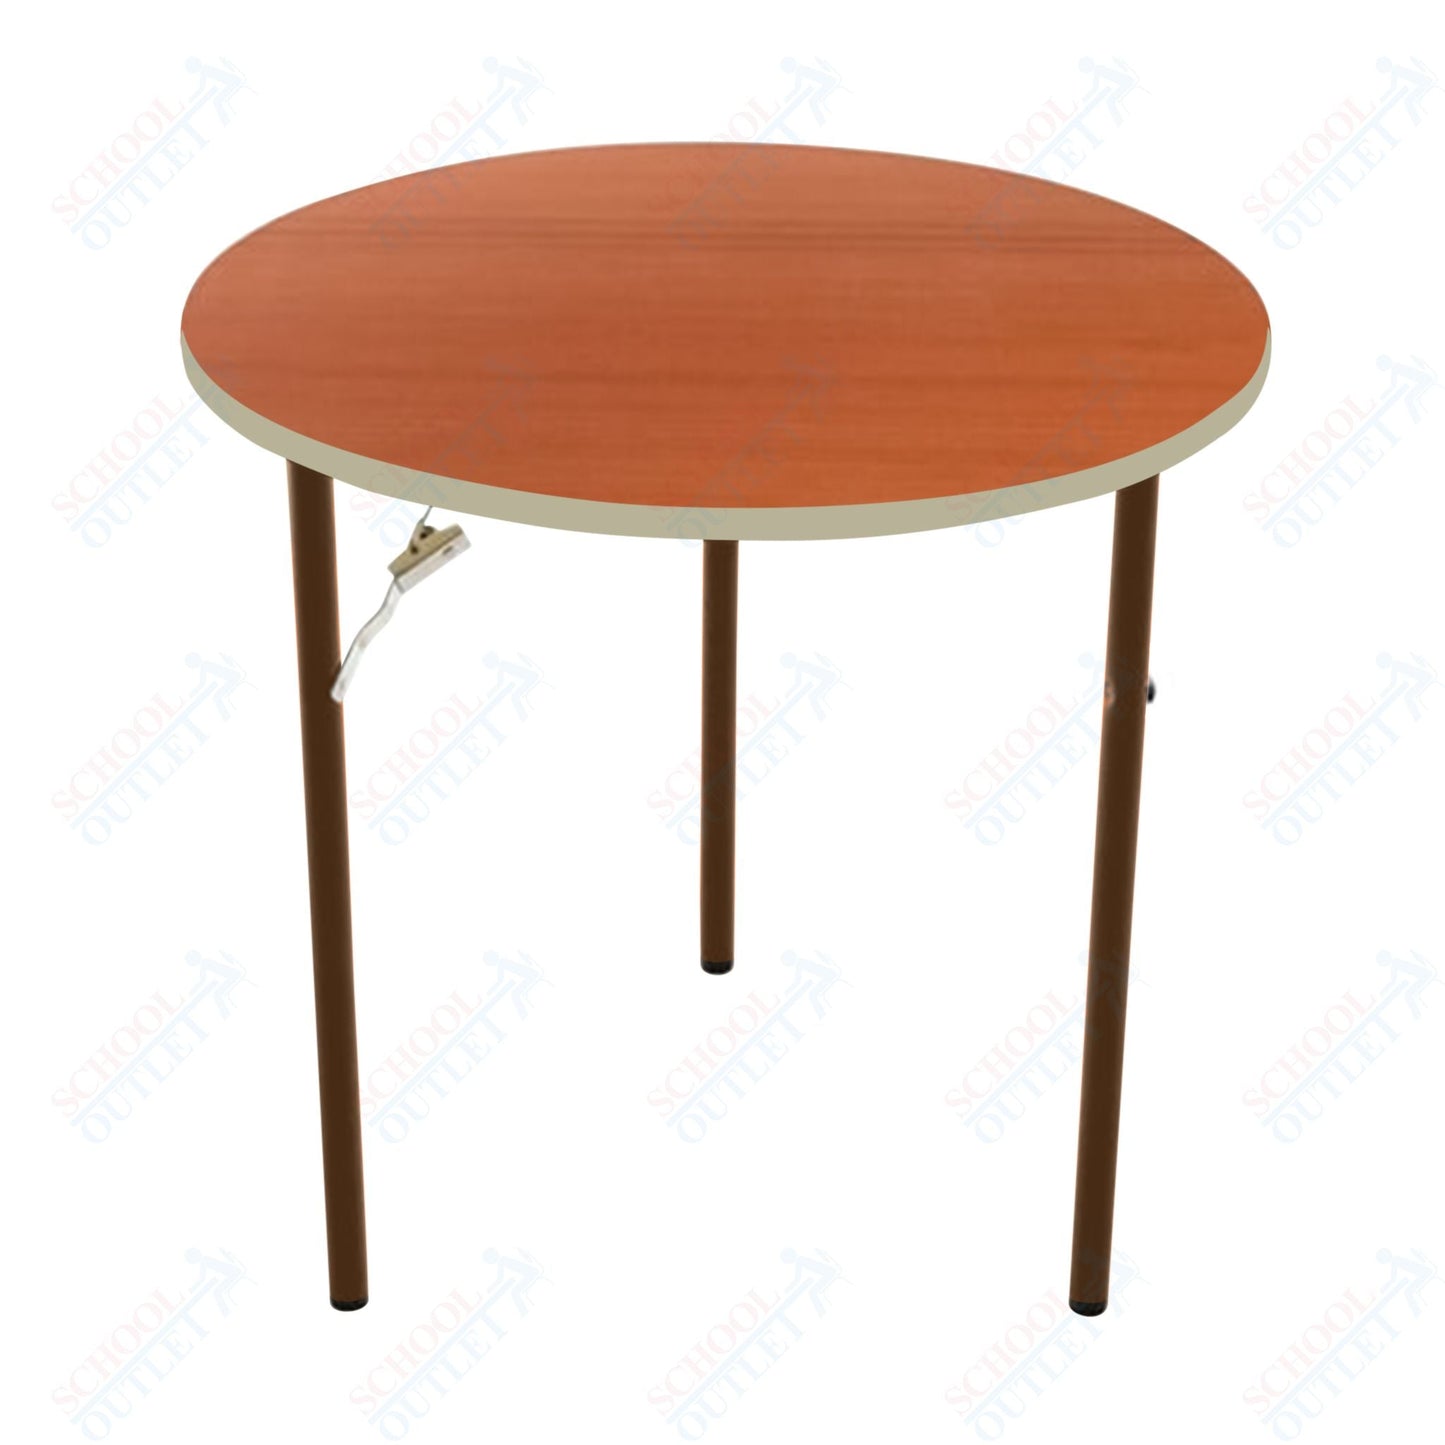 AmTab Folding Table - Plywood Stained and Sealed - Vinyl T - Molding Edge - Round - 66" Diameter x 29"H (AmTab AMT - R66PM) - SchoolOutlet